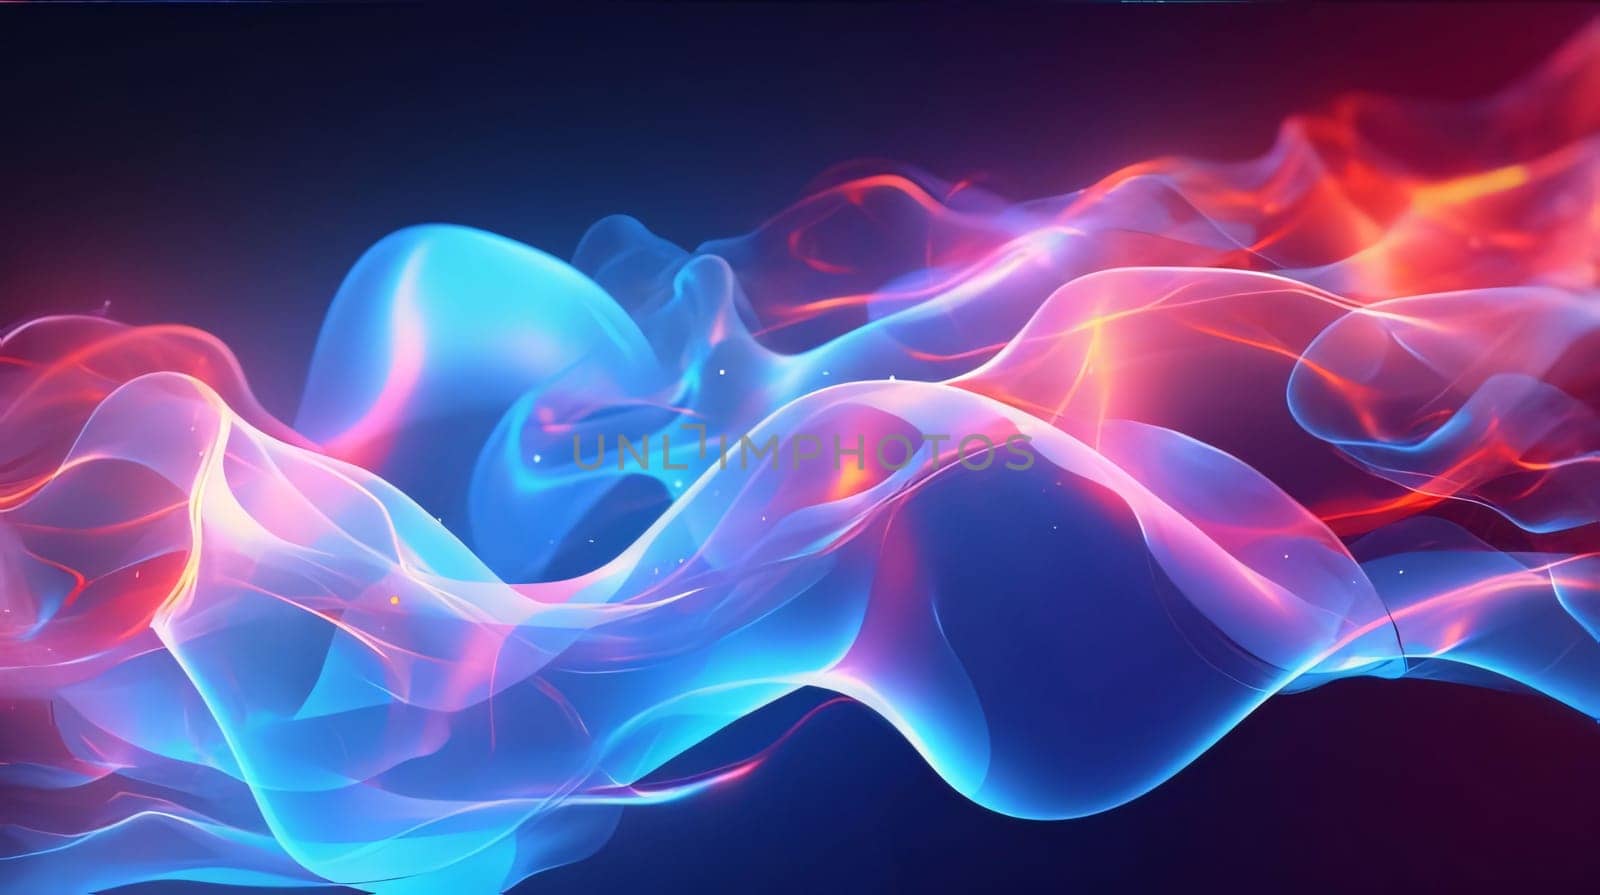 Abstract background design: abstract background with blue and red smoke, 3d render illustration